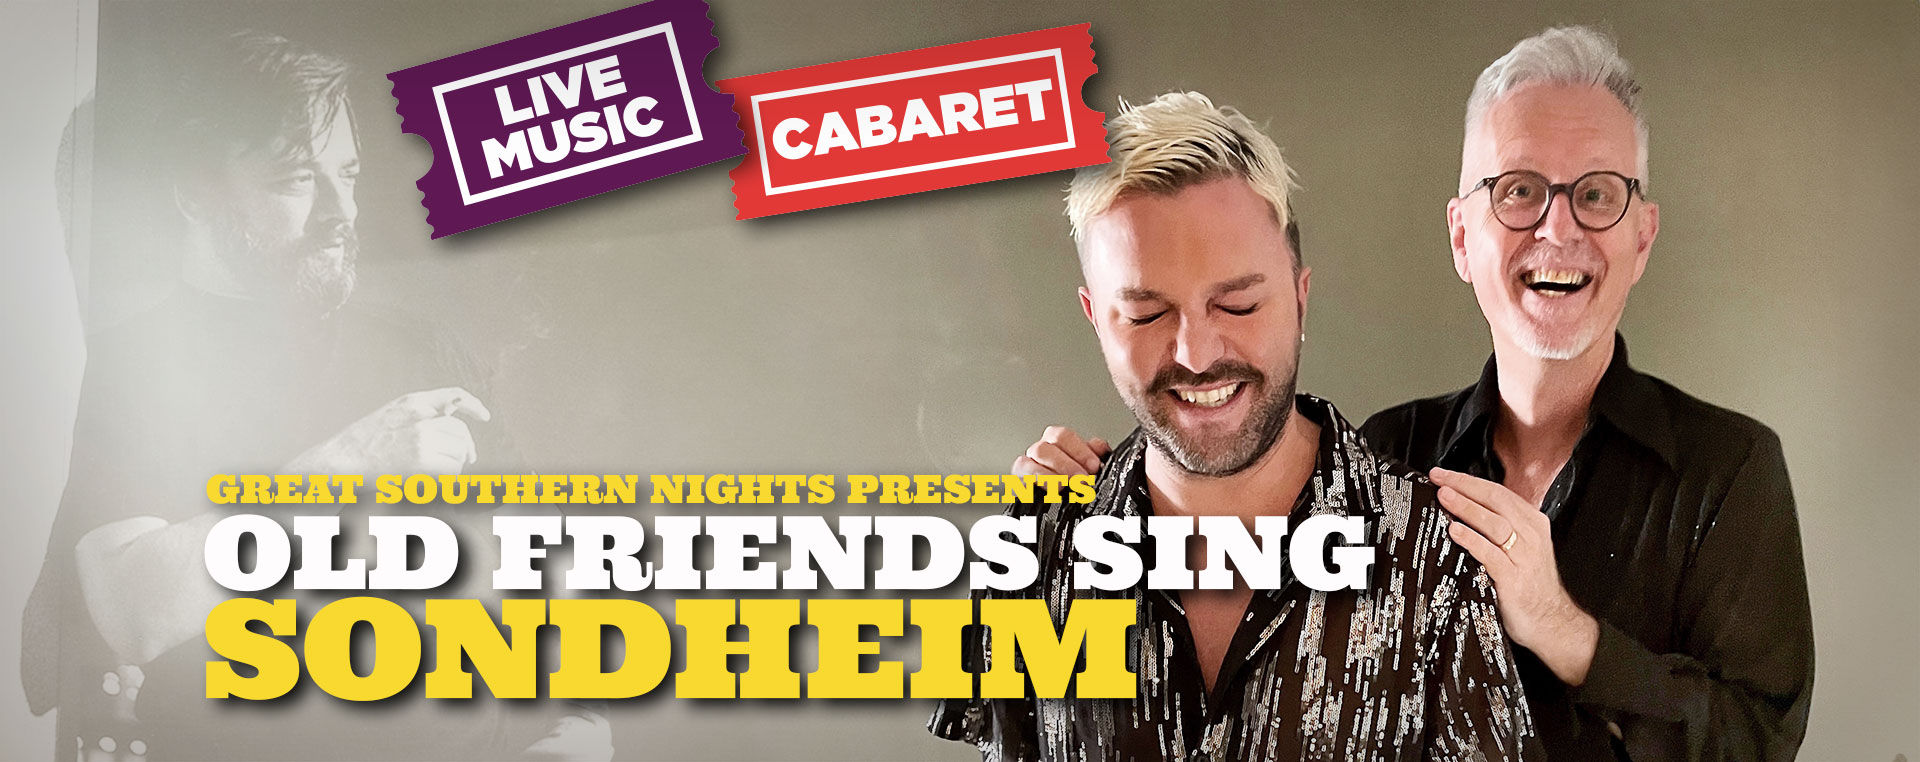 Great Southern Nights presents Old Friends Sing Sondheim 9 Mar NSW